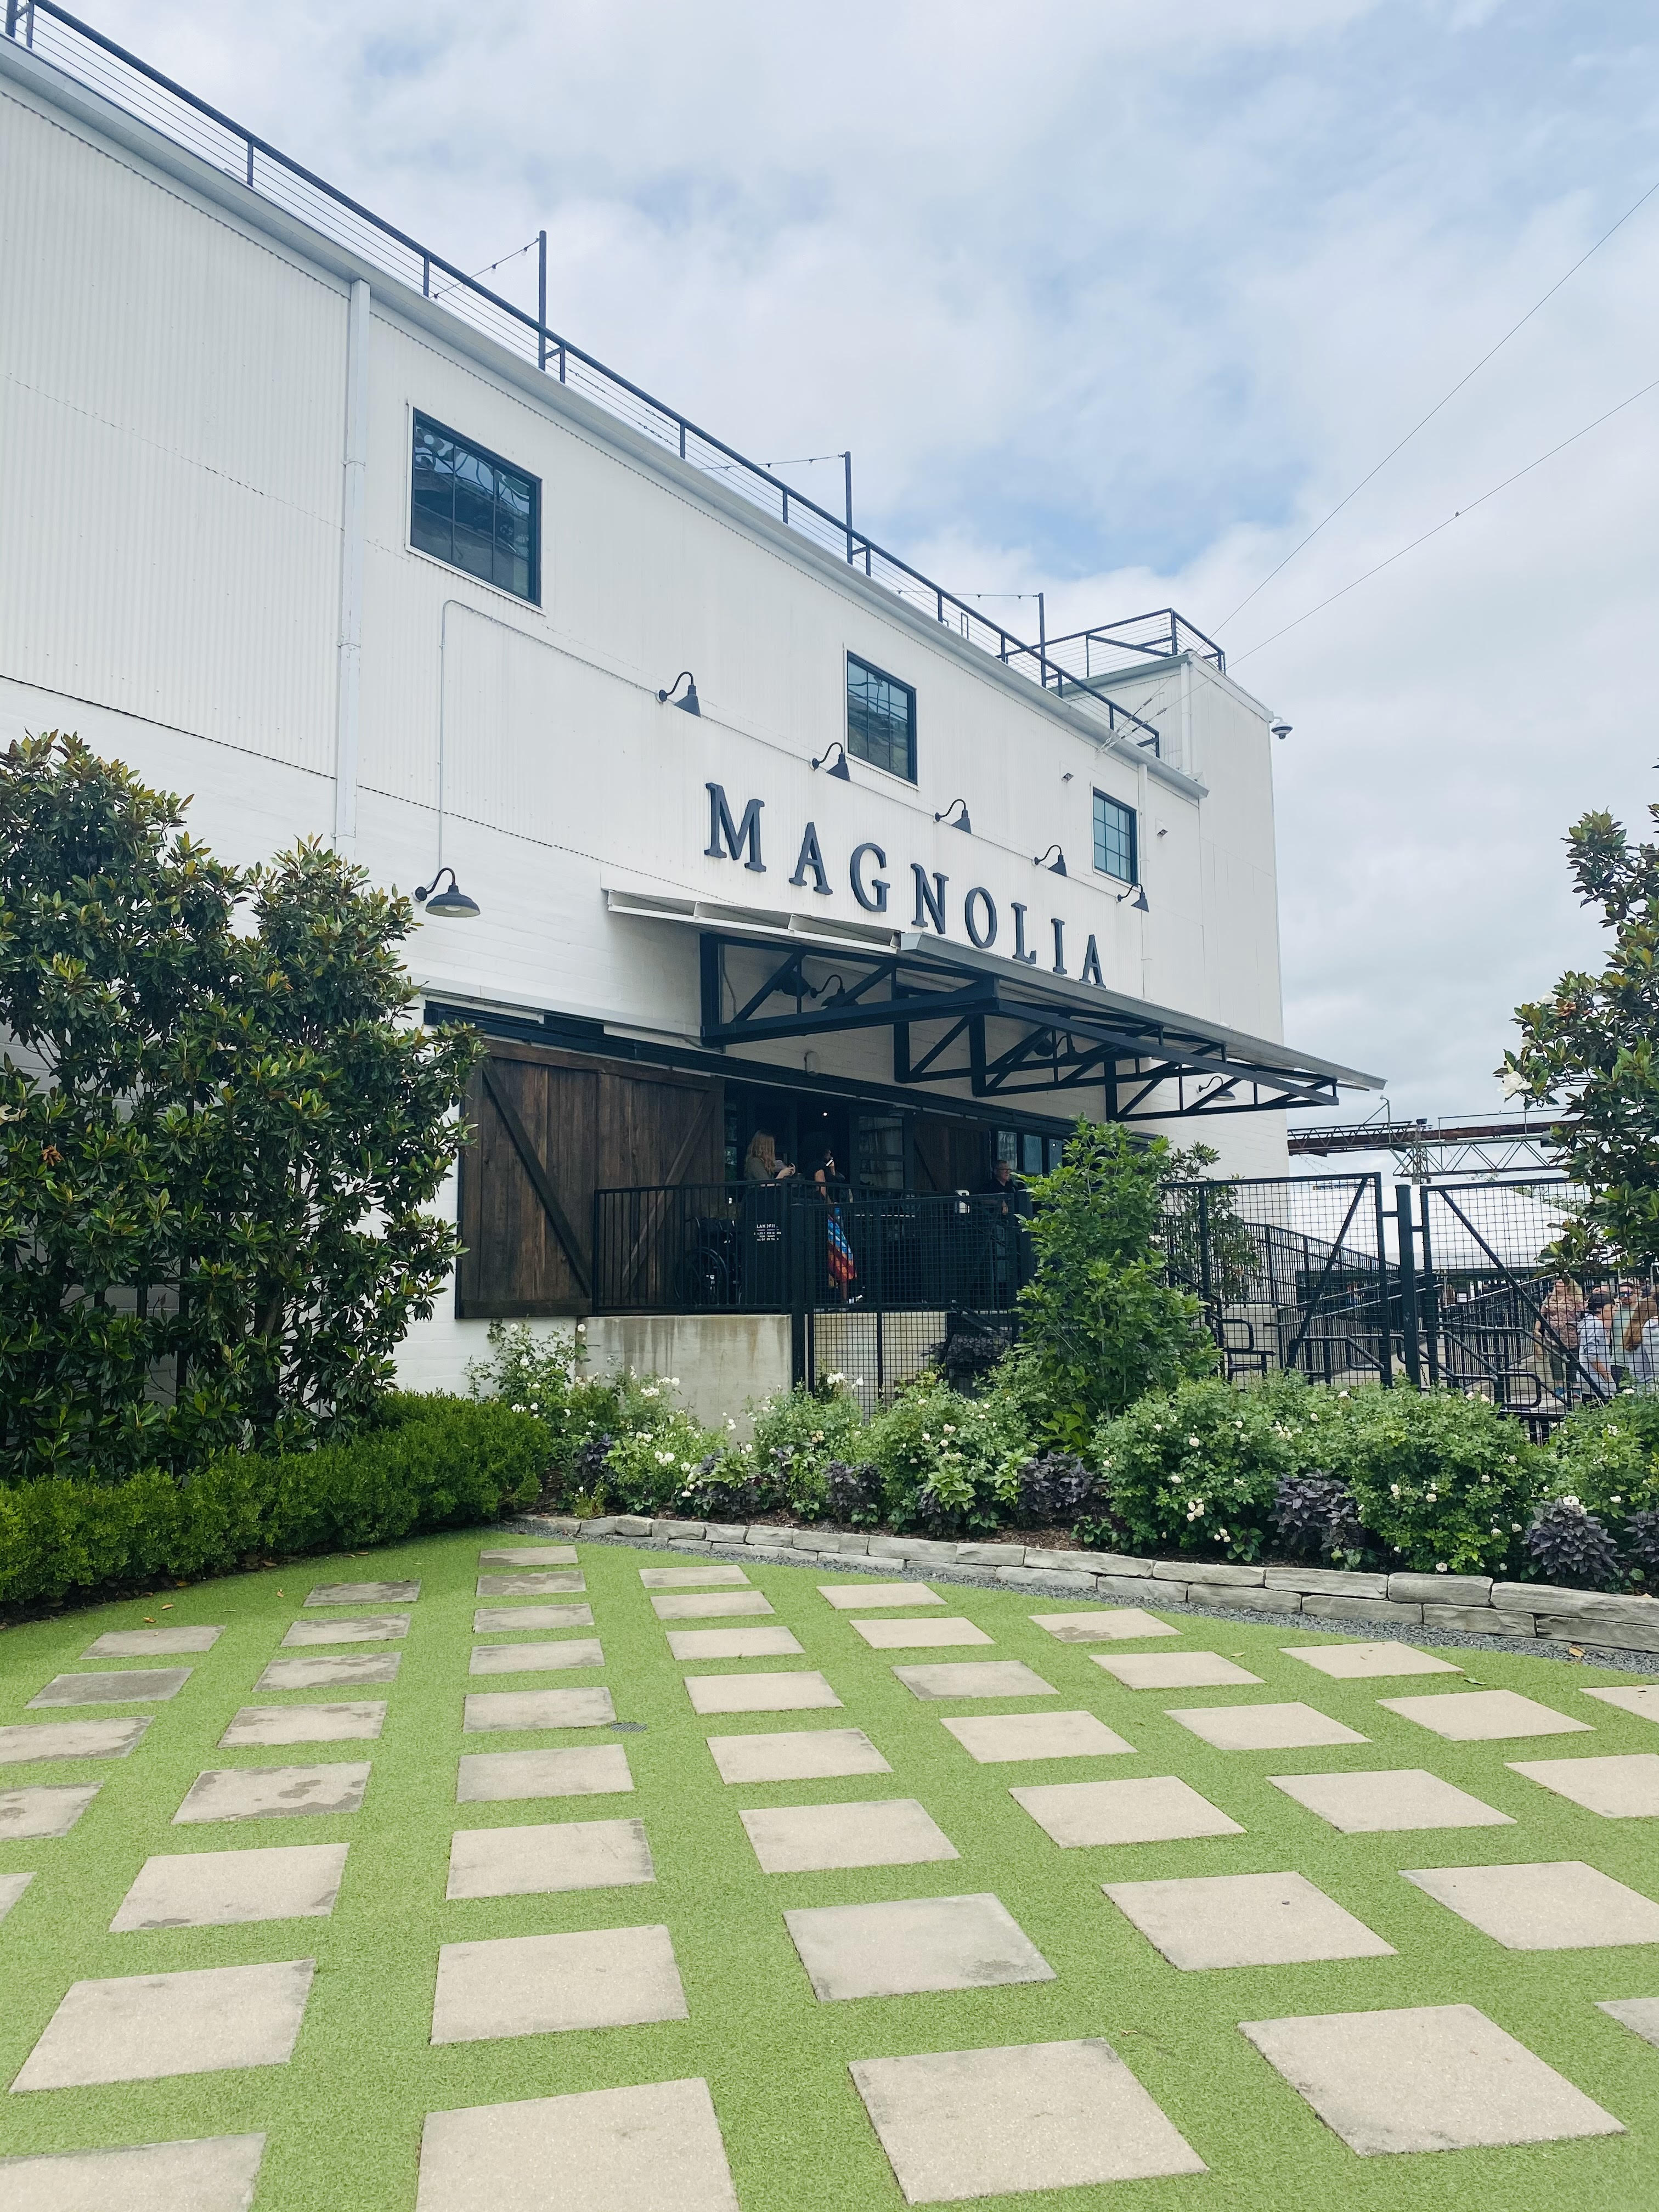 Magnolia Waco, Texas. Not just a store, a community gathering place, a food truck heaven.